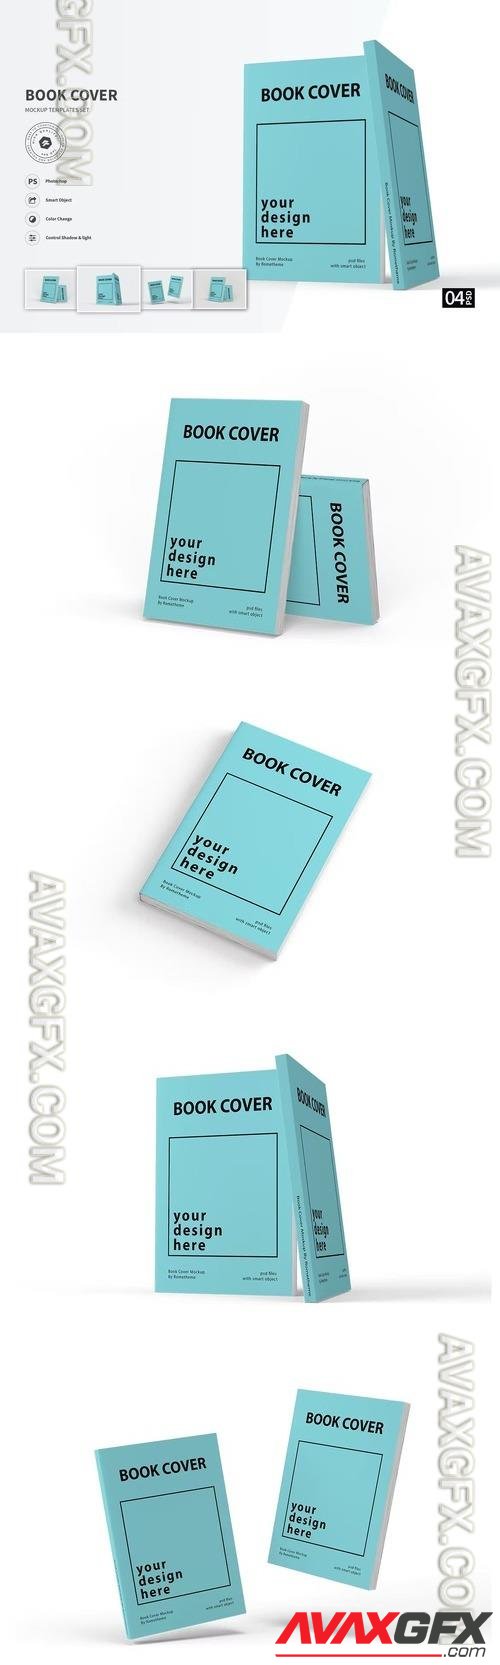 Soft Book Cover - Mockup Template VR